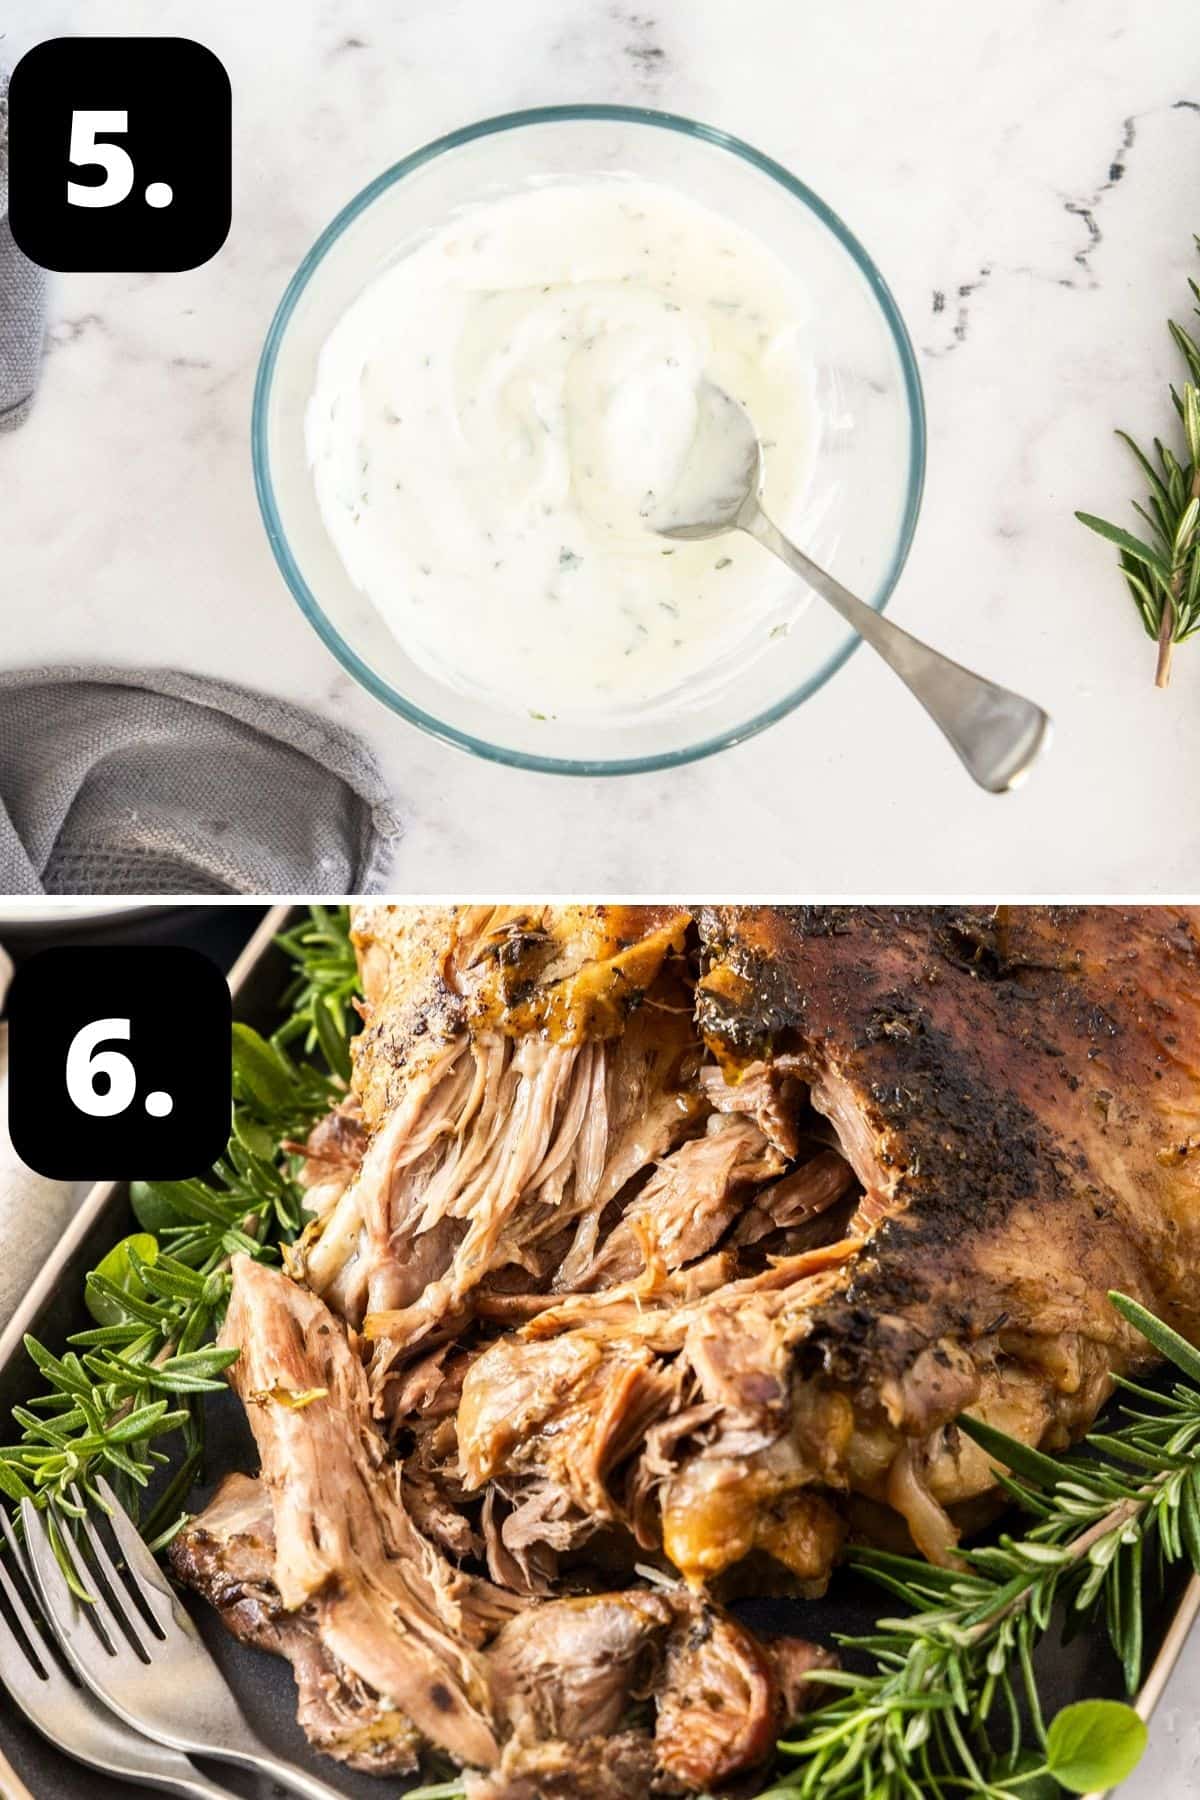 Steps 5-6 of preparing this recipe: mixing the yoghurt and mint sauce in a small bowl and shredding the lamb for serving.